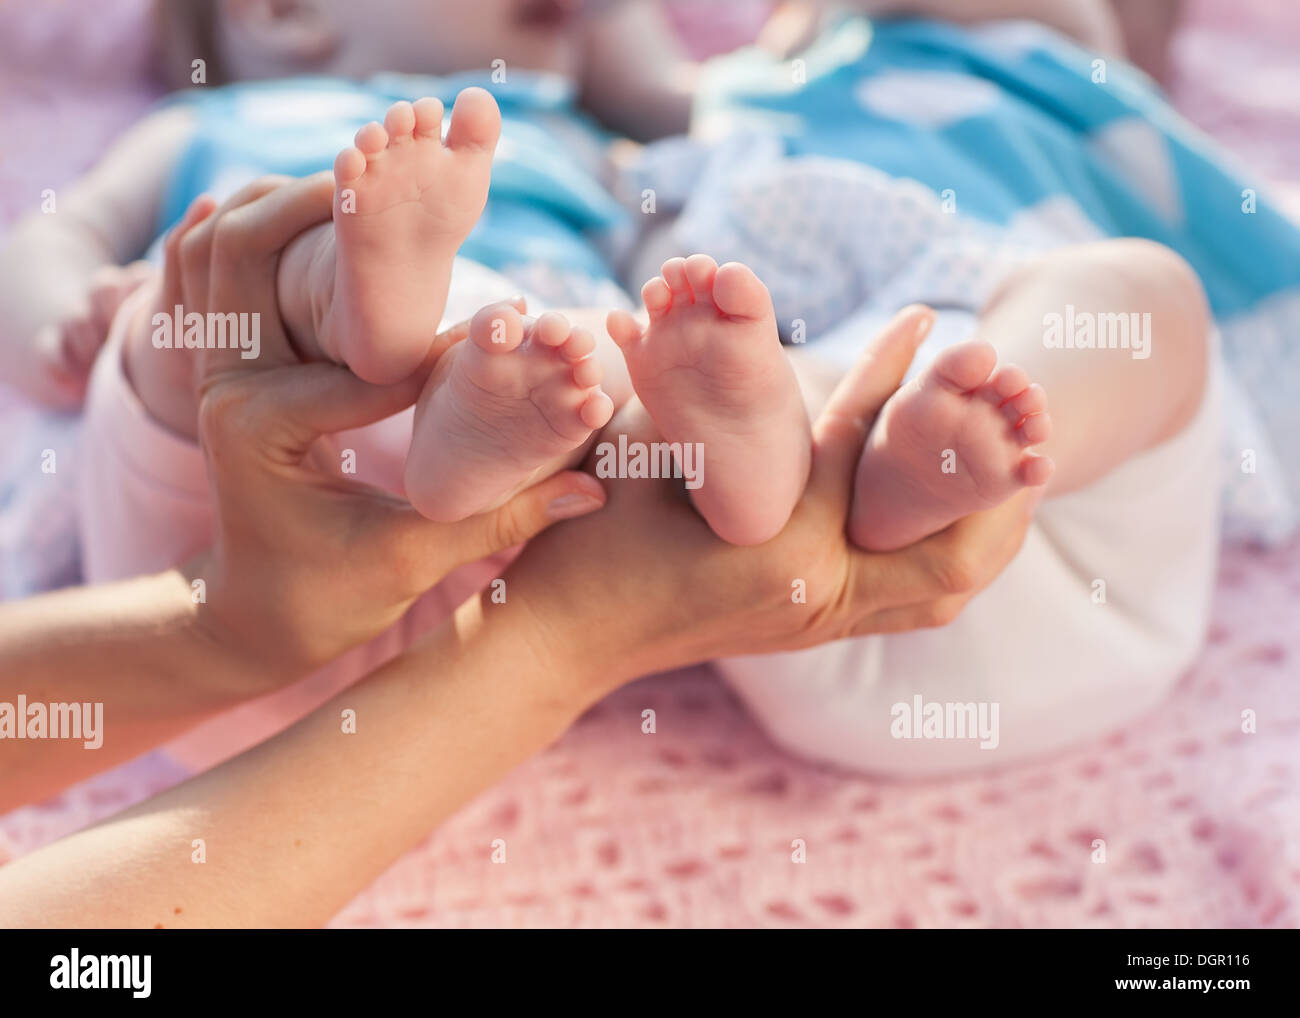 Legs newborns in parents hand. Twins lying on a pink blanket. Stock Photo